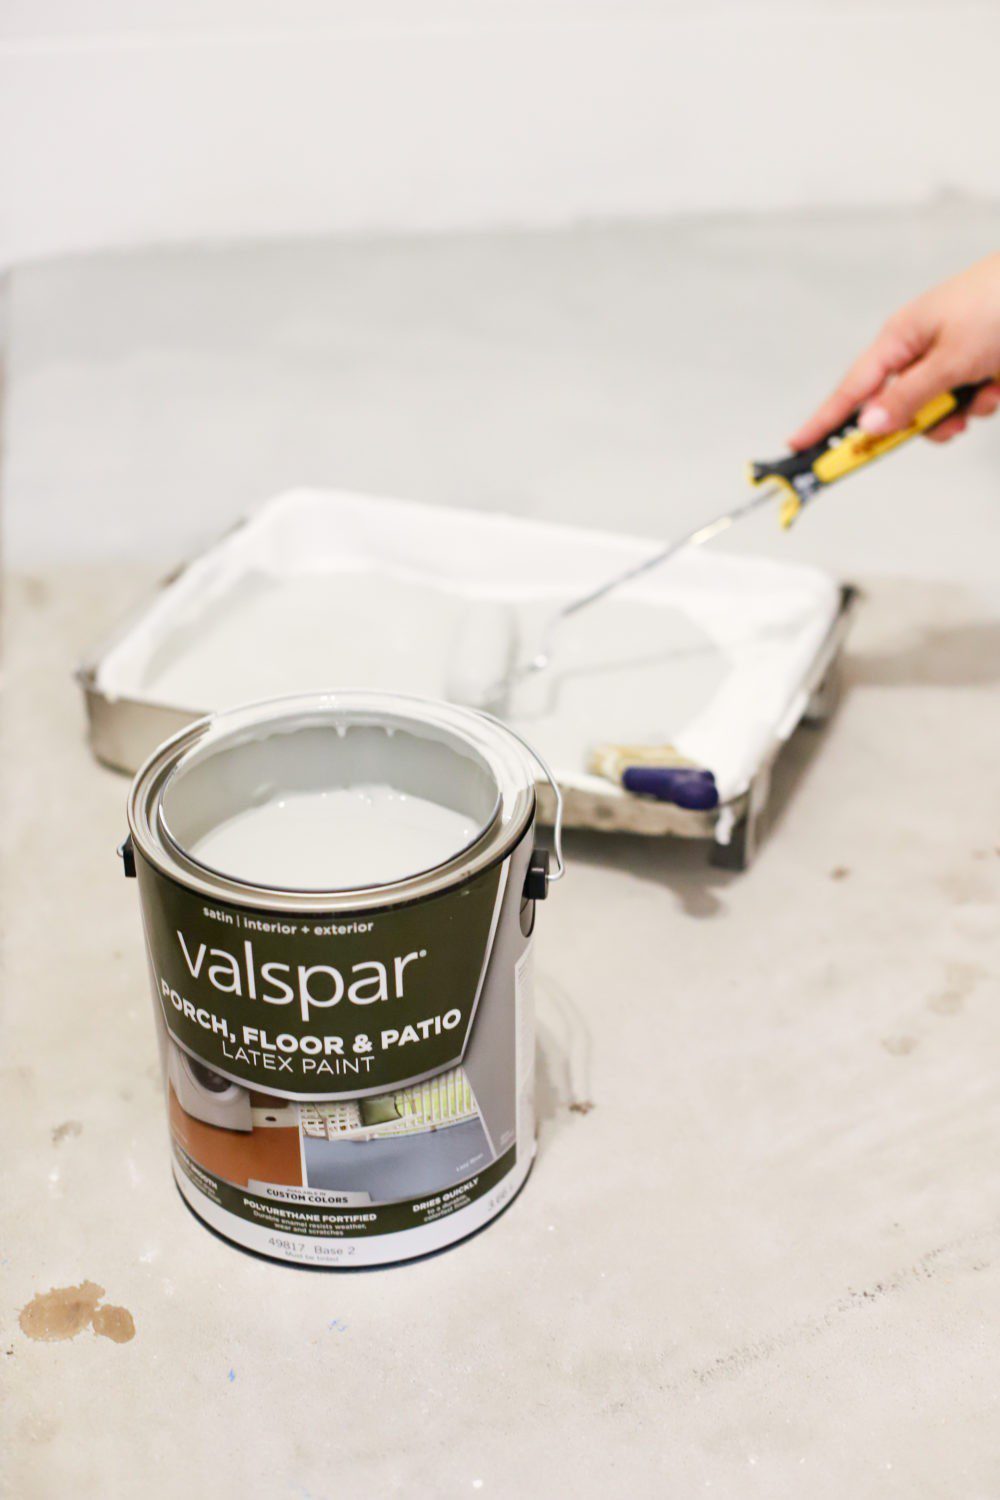 Laundry Room DIY: How to Paint a Cement Floor with Stencils | Laundry Room DIY: How to Paint a Cement Floor with Stencils by popular home decor blog, Fresh Mommy: image of Valspar porch and floor paint, paint pan, and paint roller.